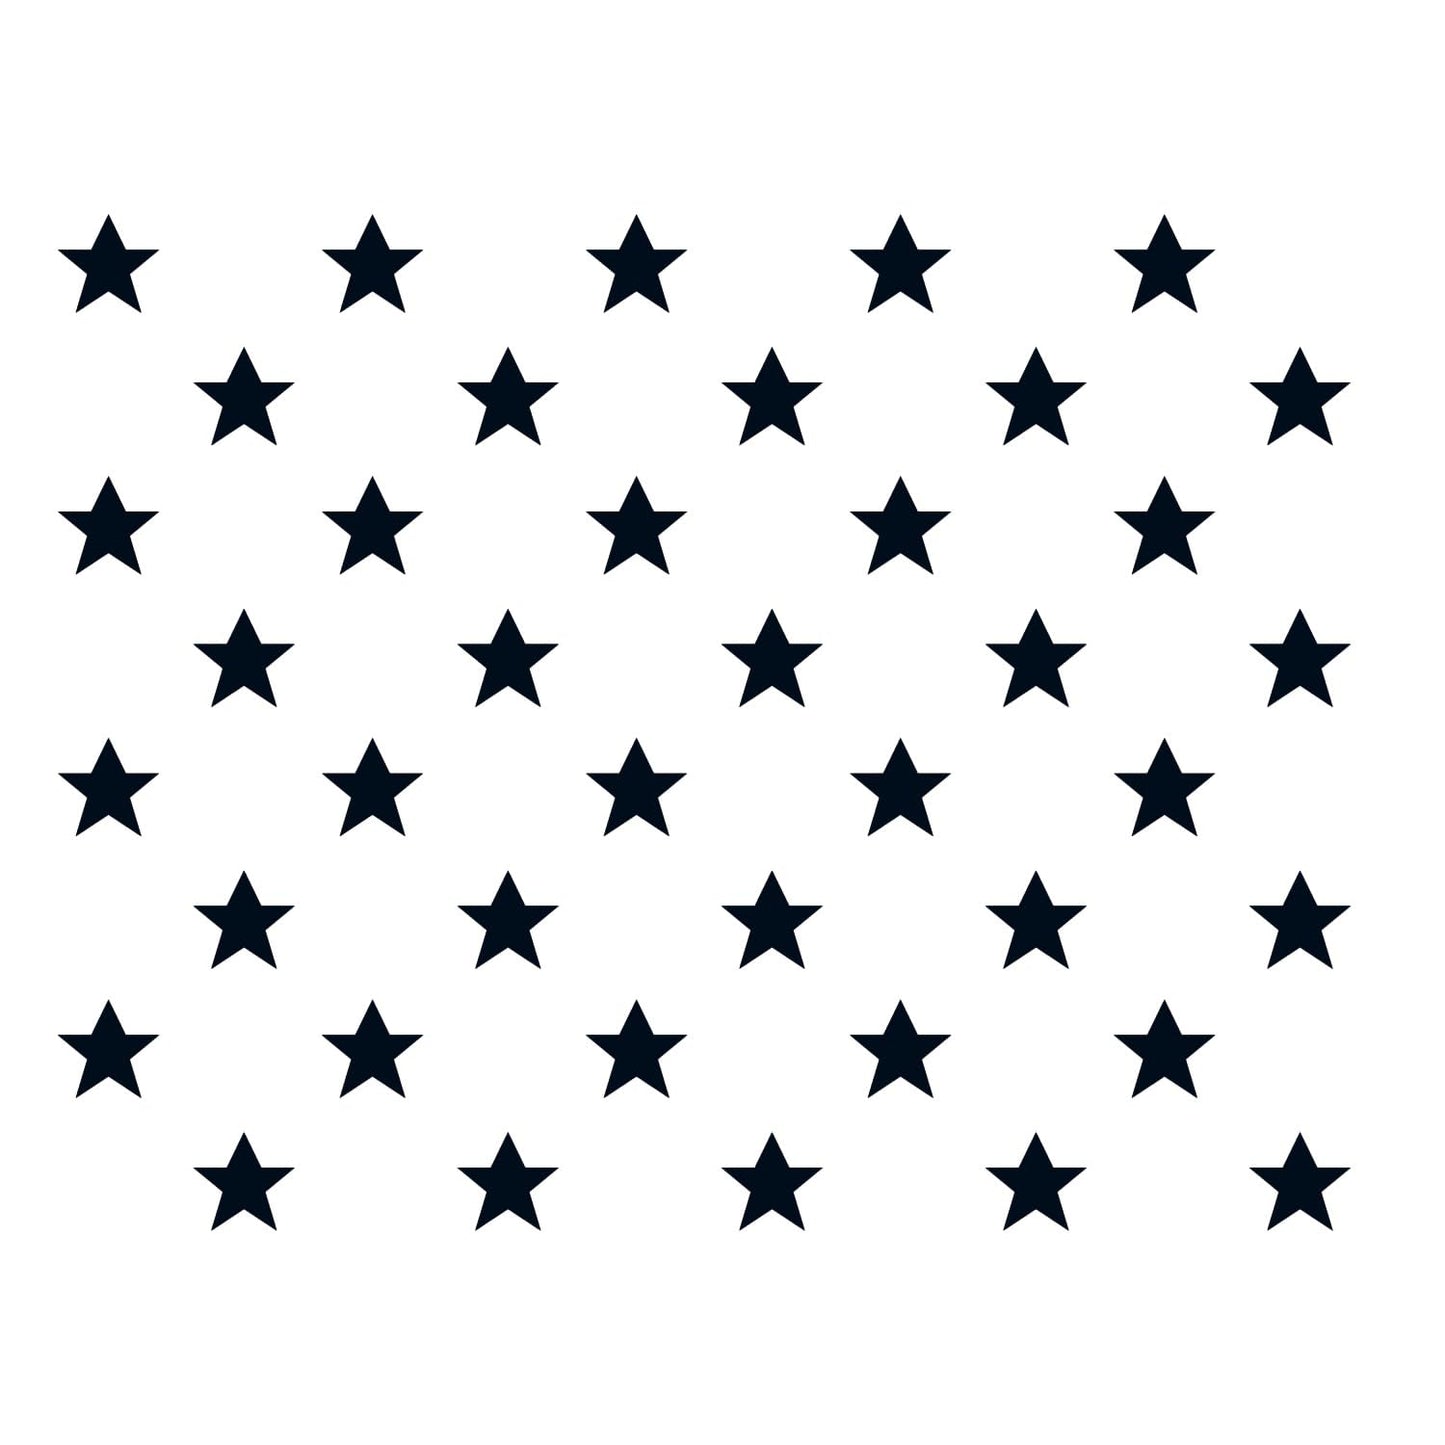 Latest Polka Star Allover Paint Wall Stencil -Pack of 1, Sheet Size 16 x 21 inch/Design Size 15 x 19 inch.